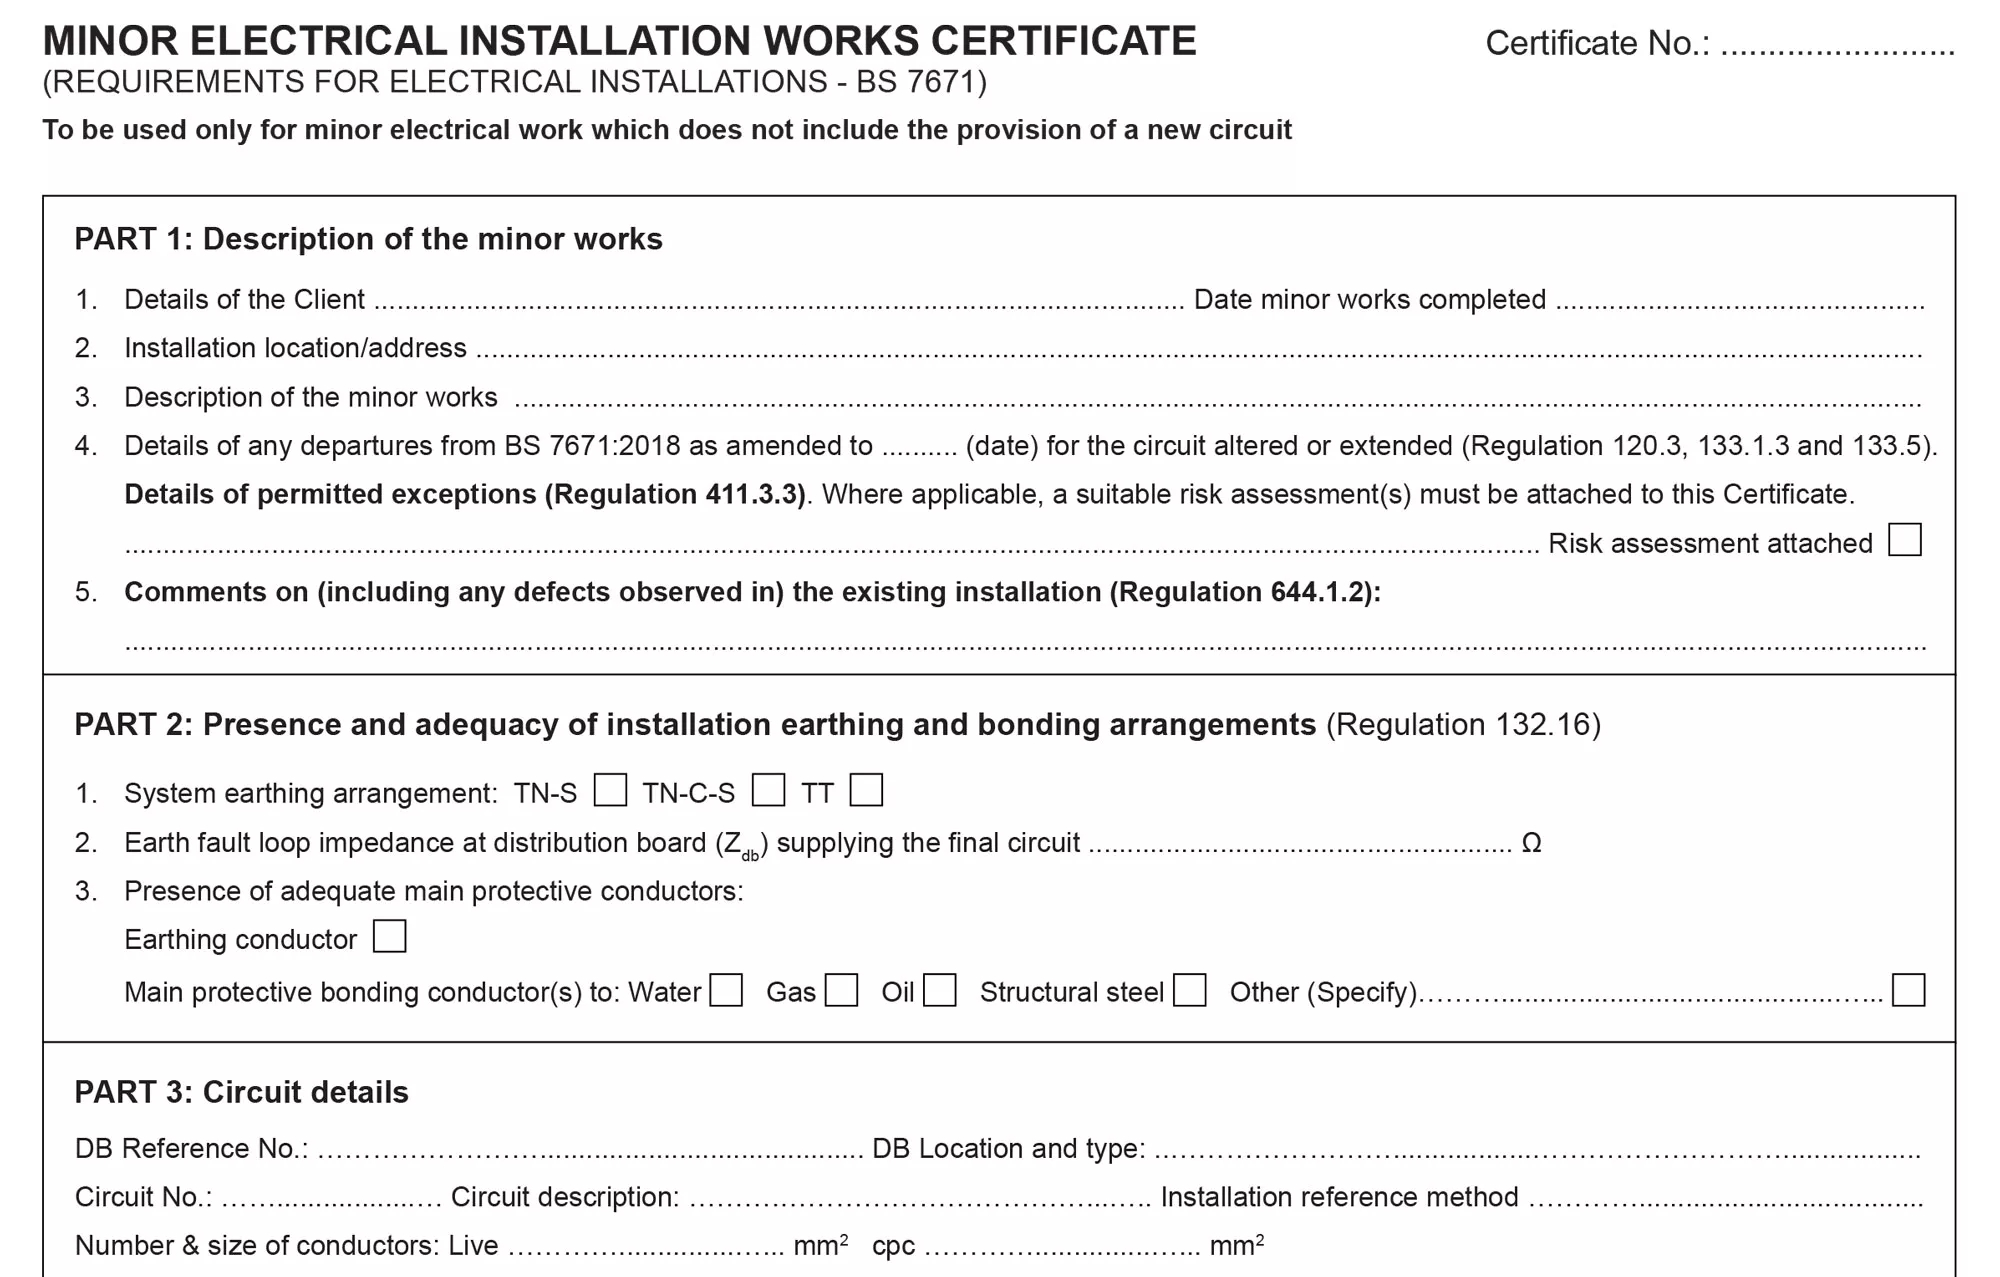 Model Forms For Minor Electrical Installation Works Certificate Template